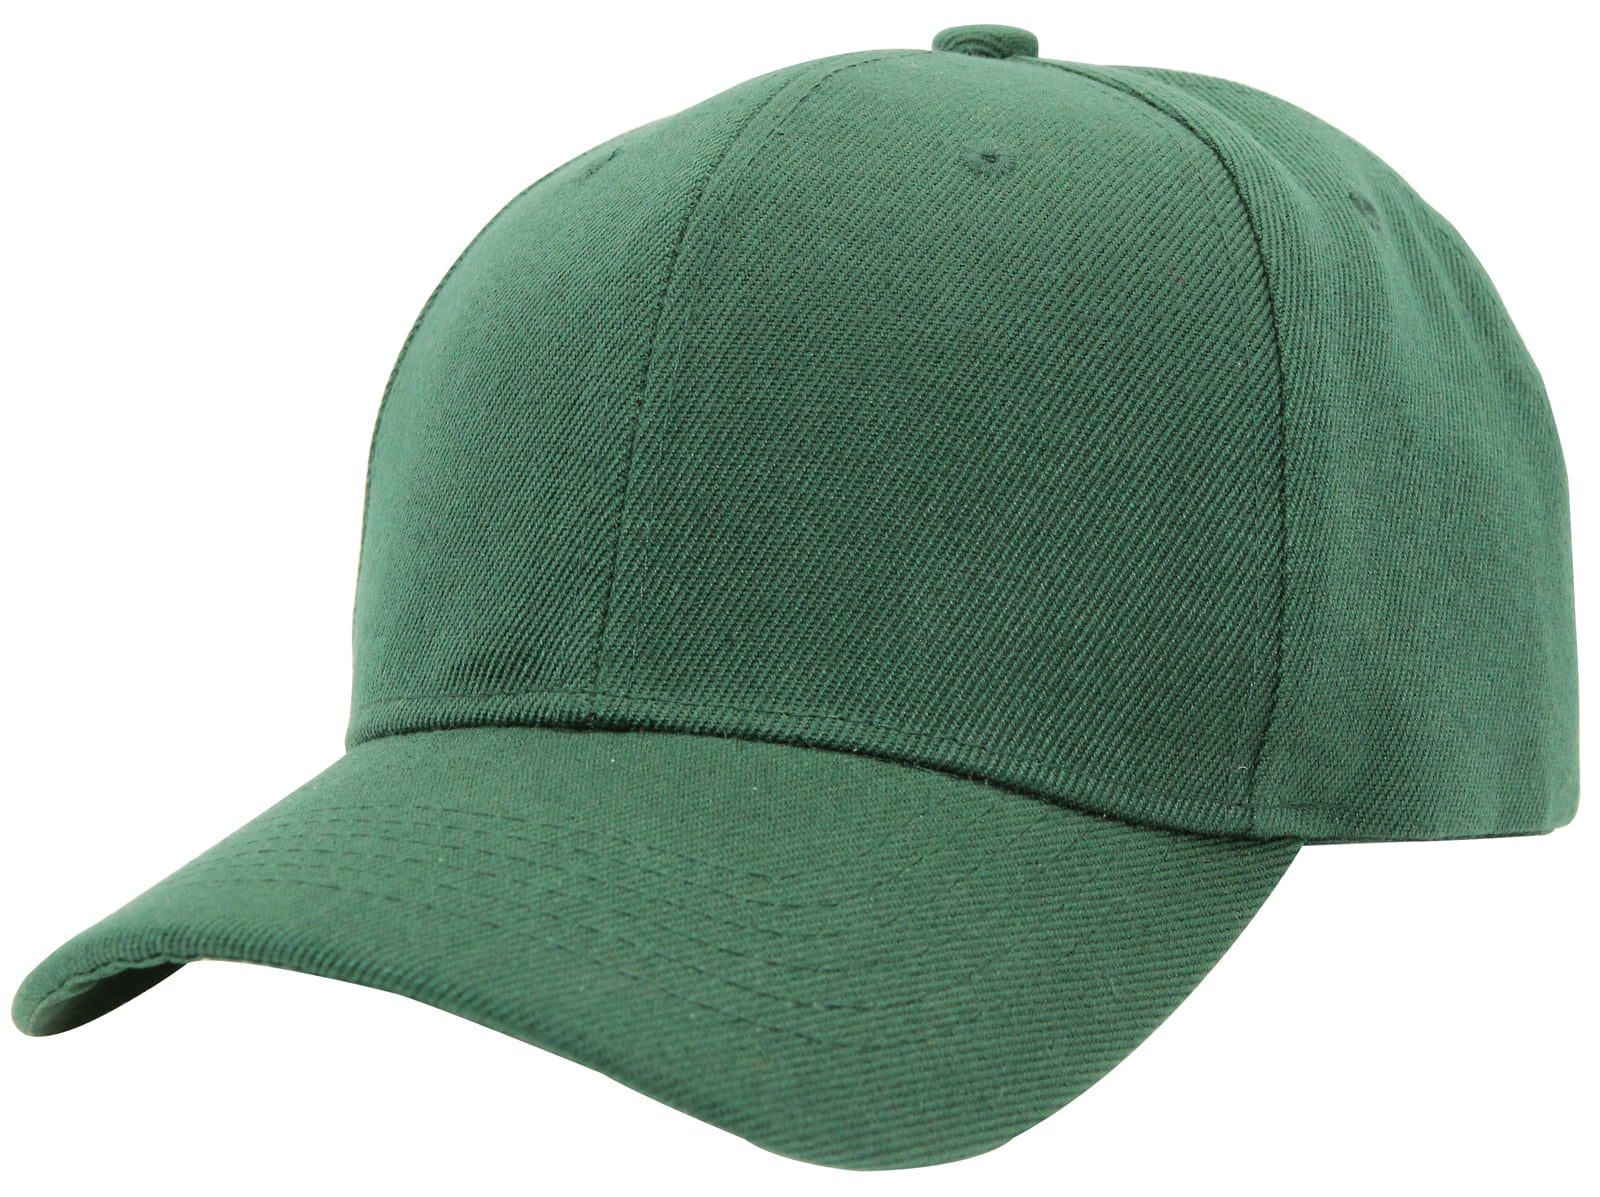 WOMEN FASHION Accessories Hat and cap Green discount 53% Pink/White/Green Single Brownie hat and cap 